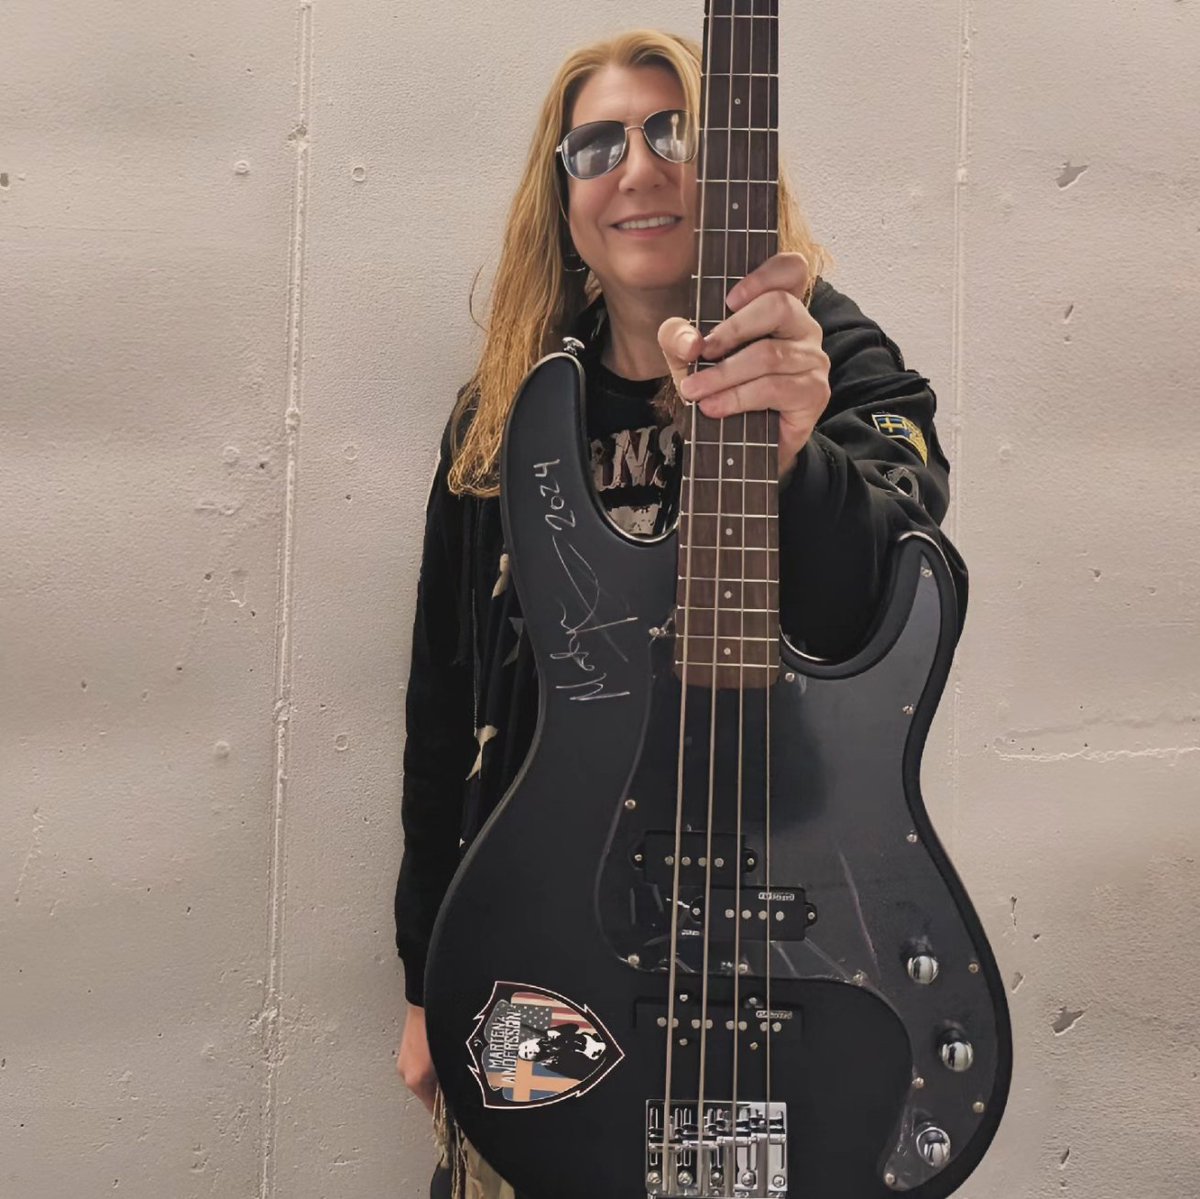 Don't forget that you can own this Marten Andersson bass (ESP LTD). The sale proceeds will go to Gary Velasco, who is fighting ALS and does not have health insurance. Bid if you can or PLEASE share this post. Your share support is super appreciated too. eBay.com/itm/2963990048…